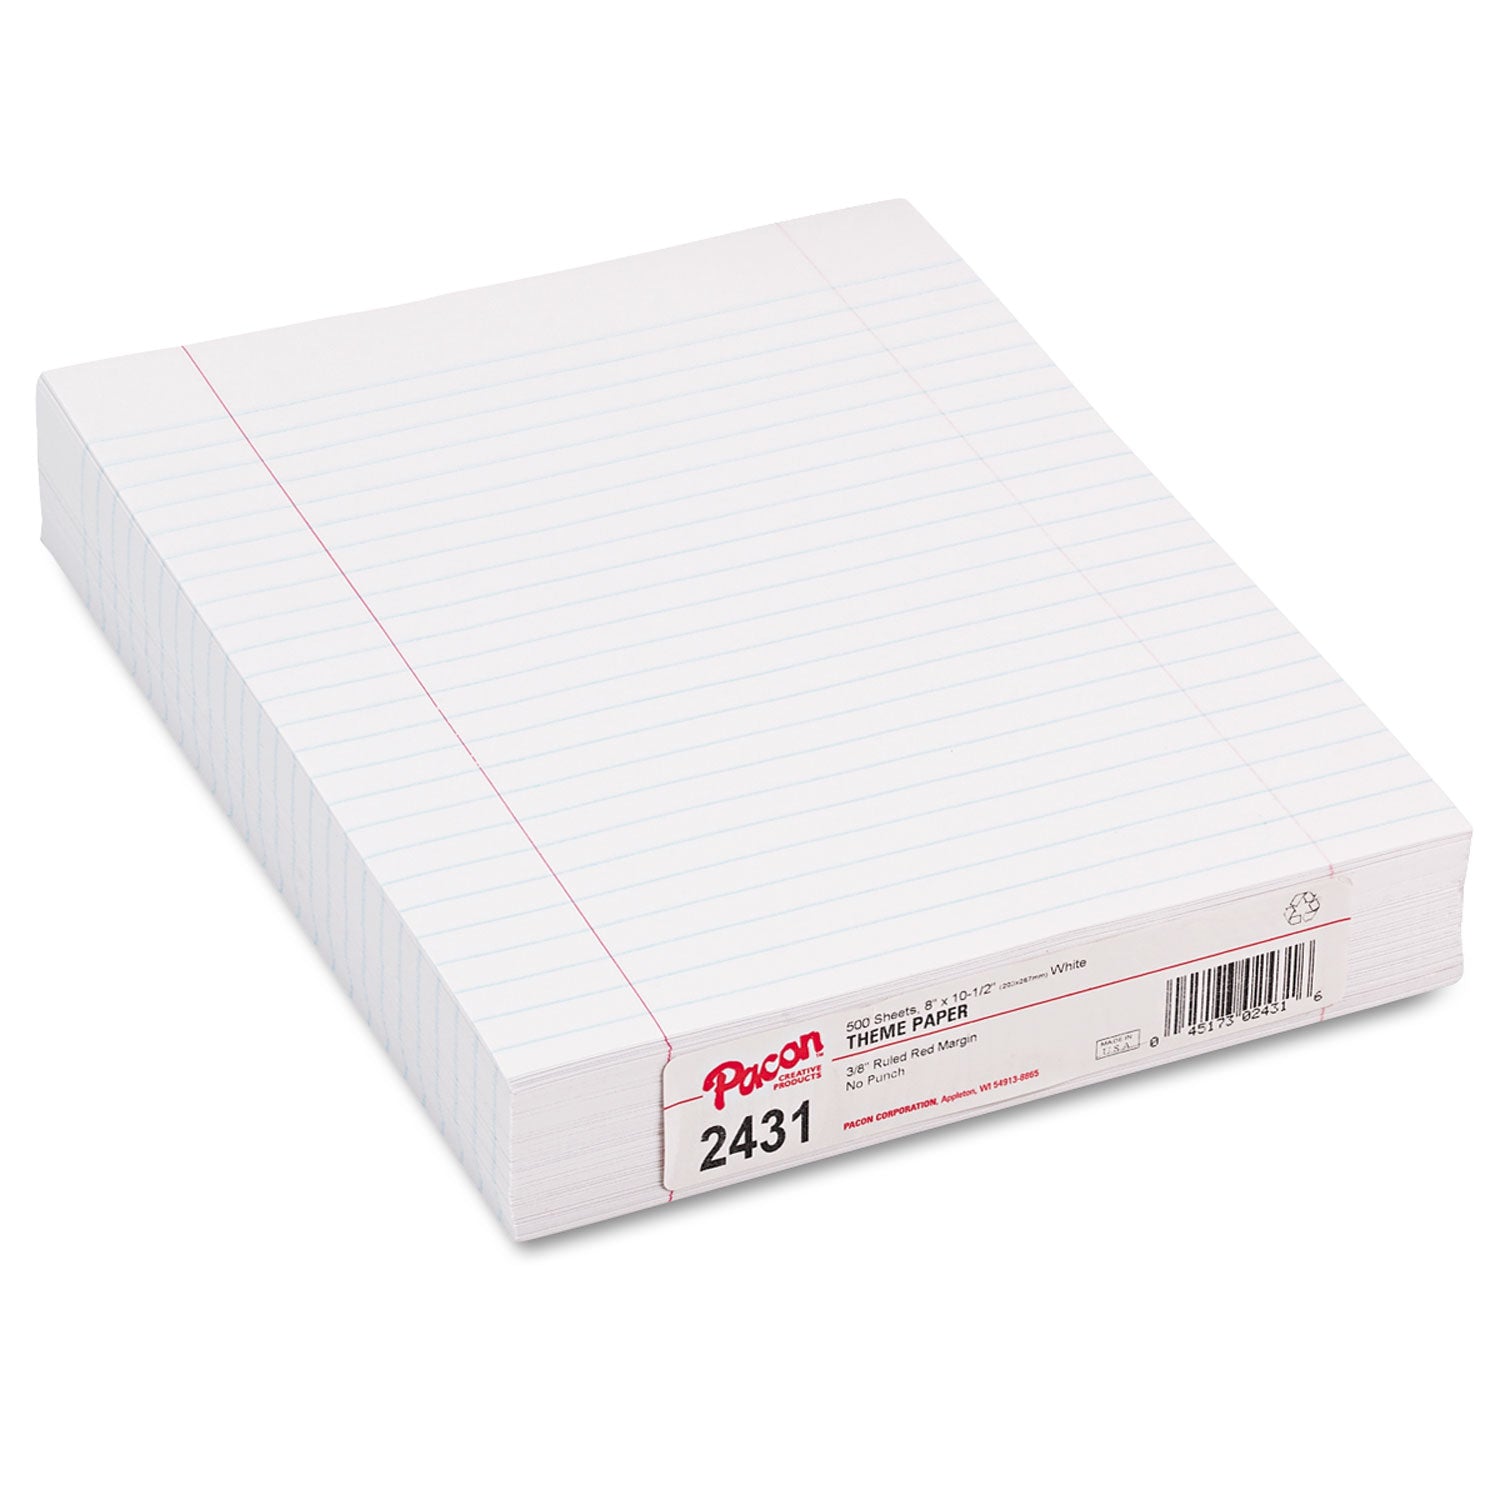 Composition Paper, 8 x 10.5, Wide/Legal Rule, 500/Pack - 